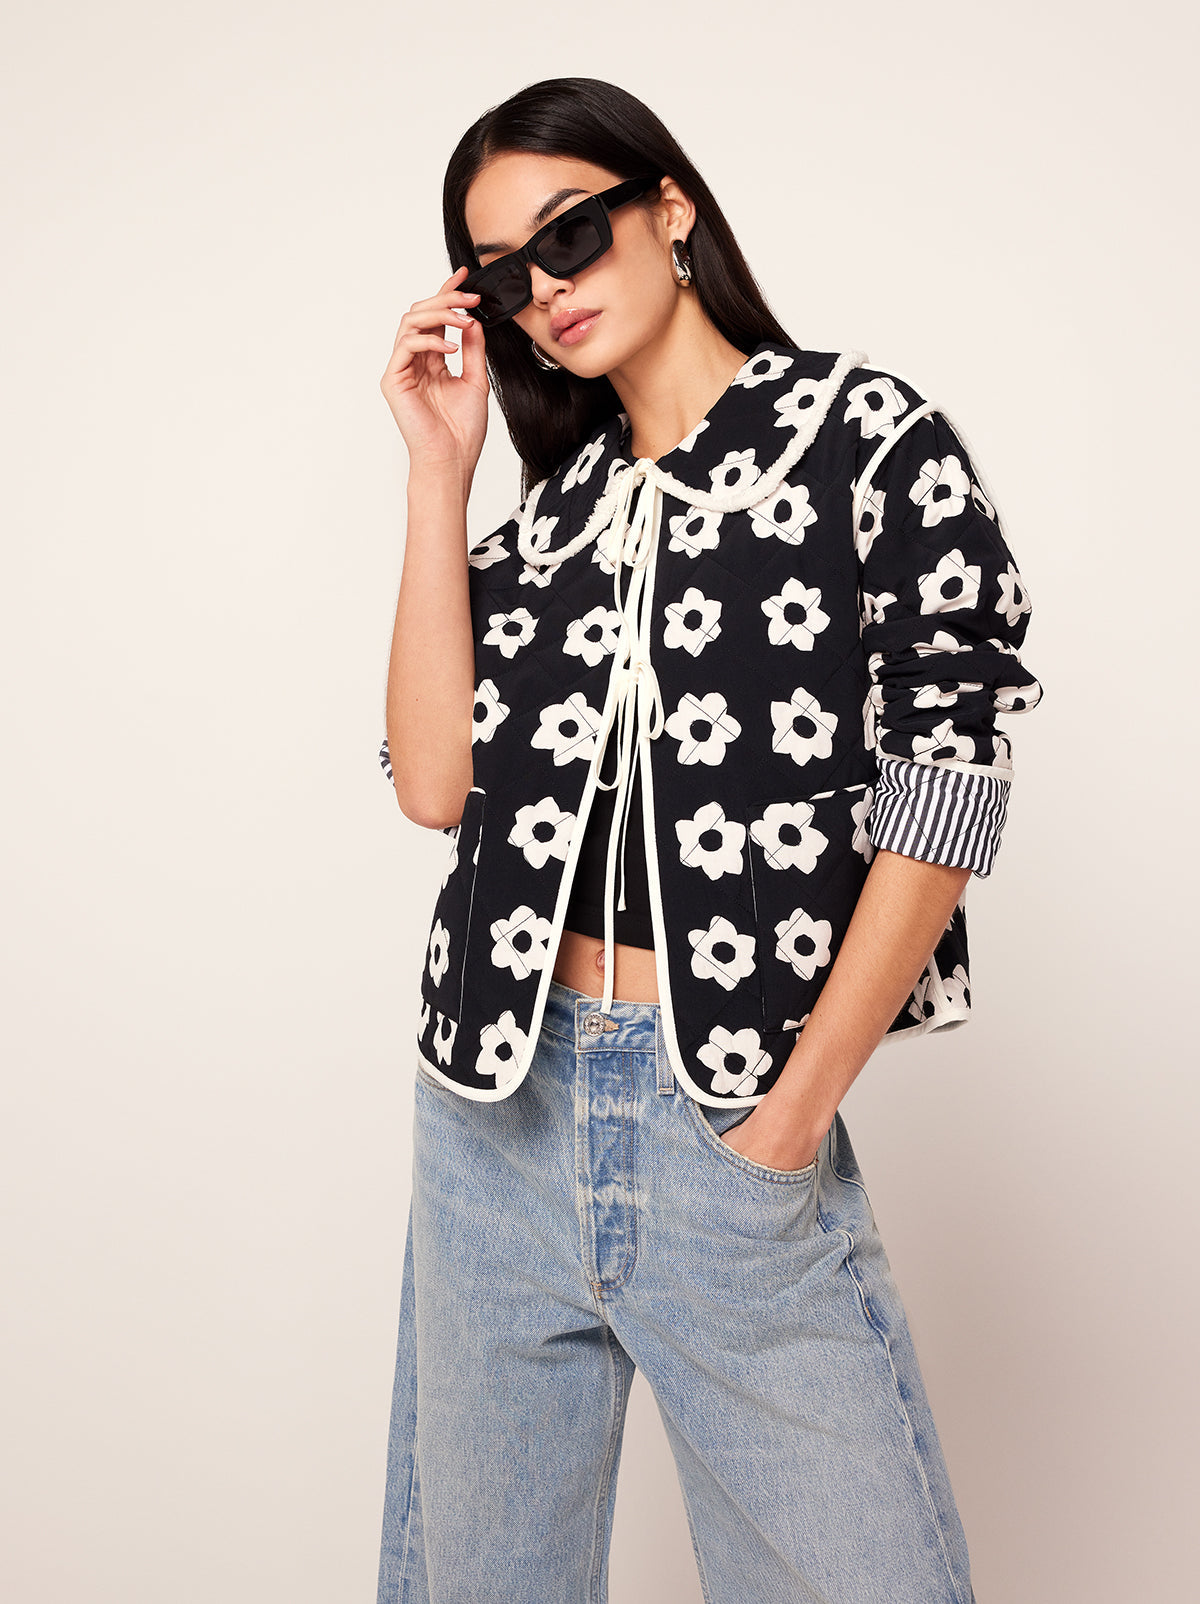 Piper Black Tiled Floral Reversible Quilted Jacket By KITRI Studio